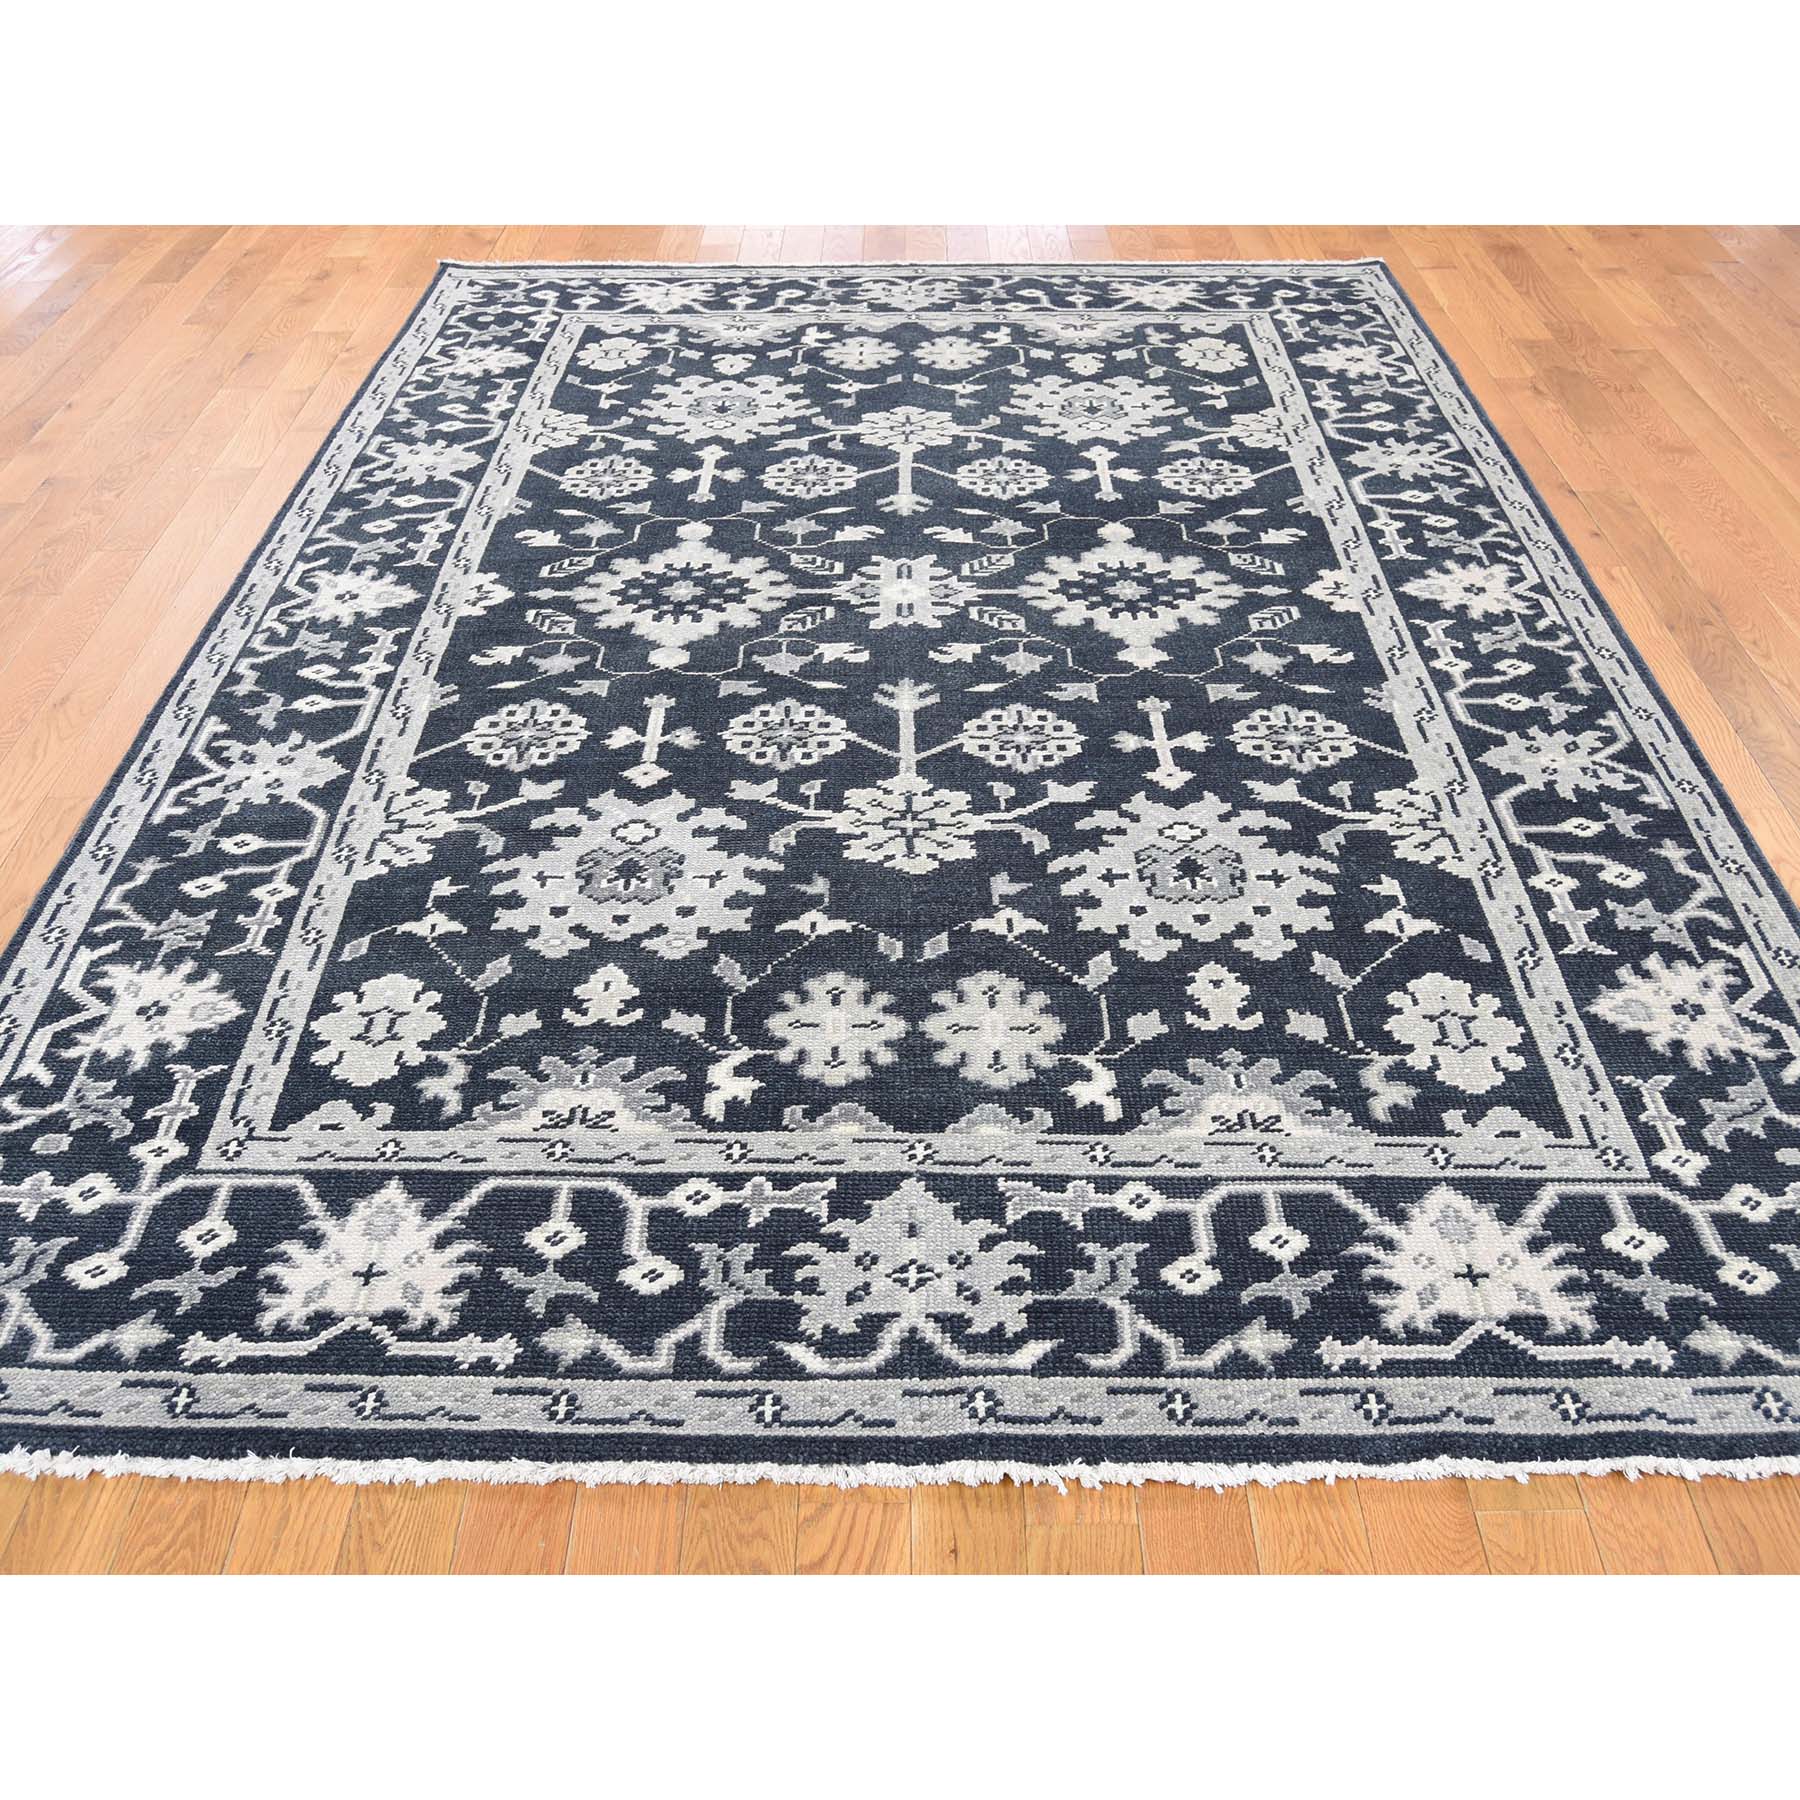 6'1"x9' Oushak Turkish Knot Cropped Thin Midnight Blue Hand Woven Oriental Rug 